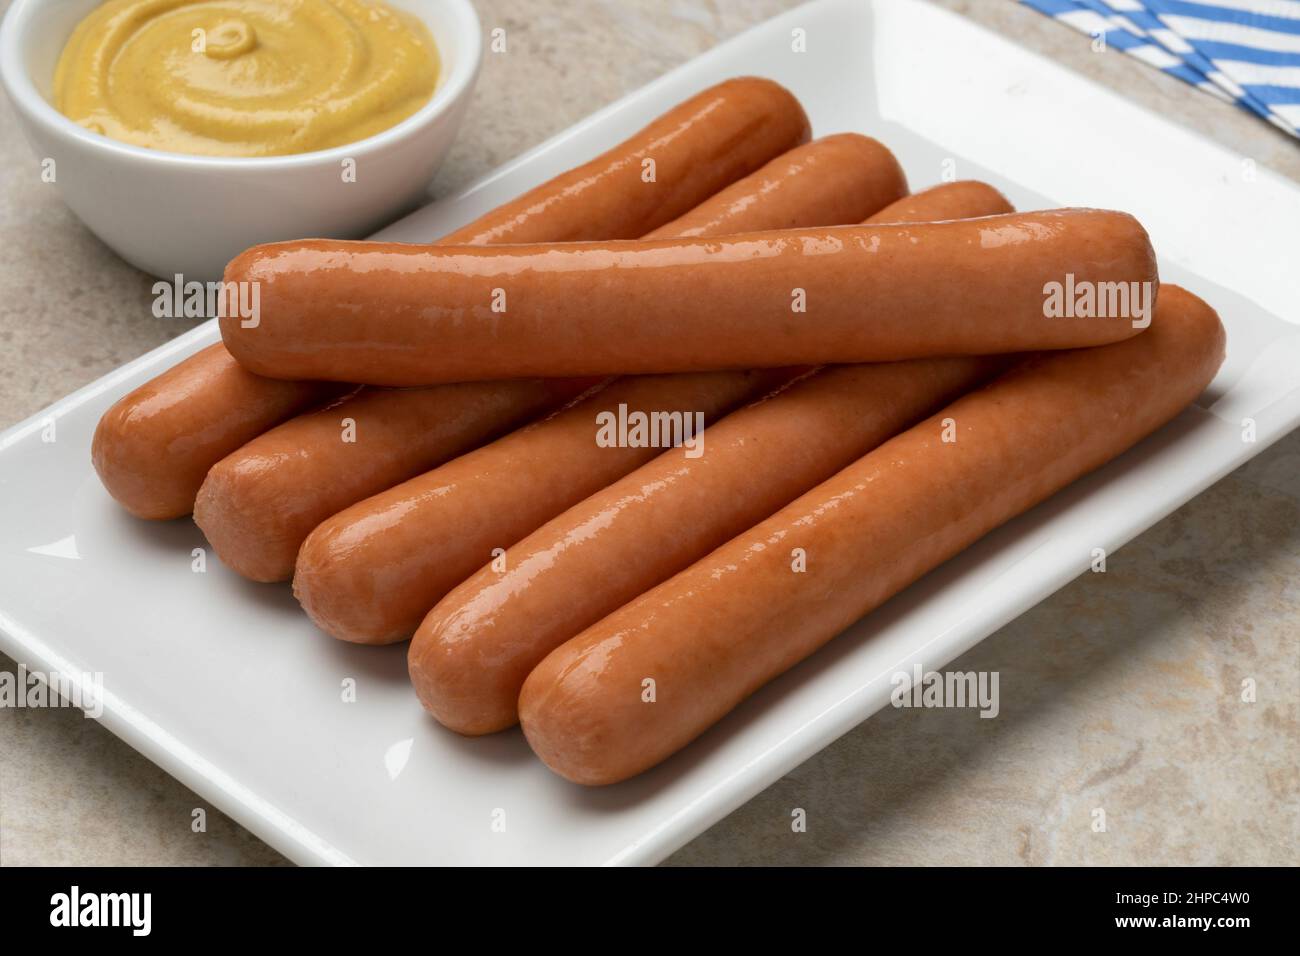 Dish with Frankfurter sausage close up for a snack with a bowl of mustard Stock Photo